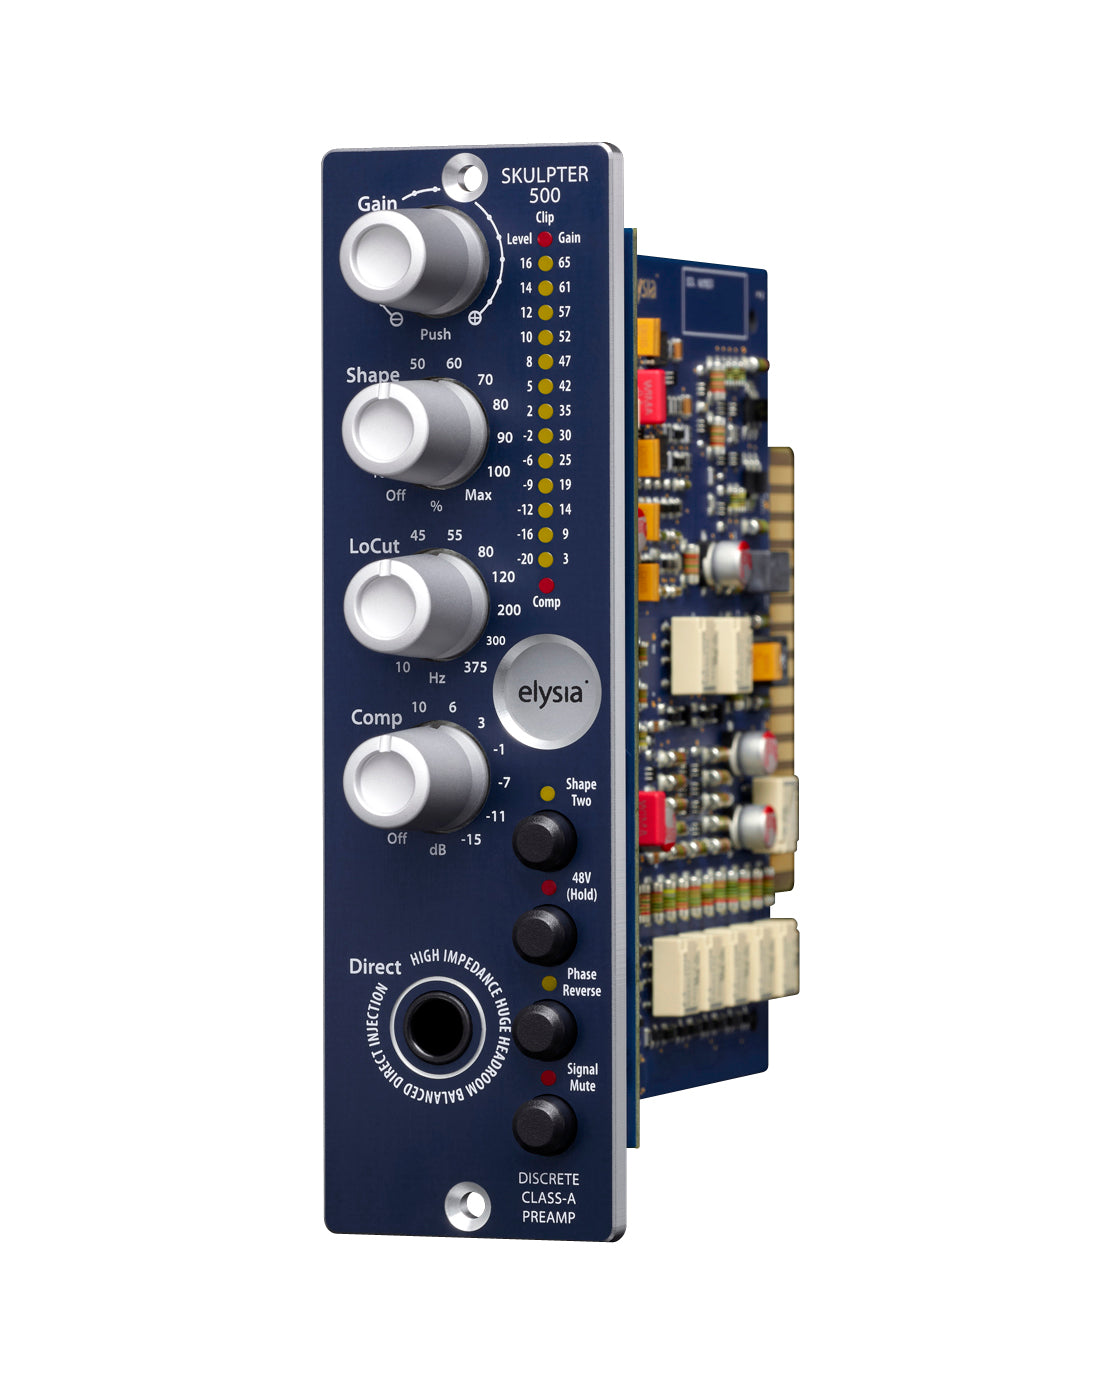 Elysia skulpter 500 - The Soundshaping Preamp Module